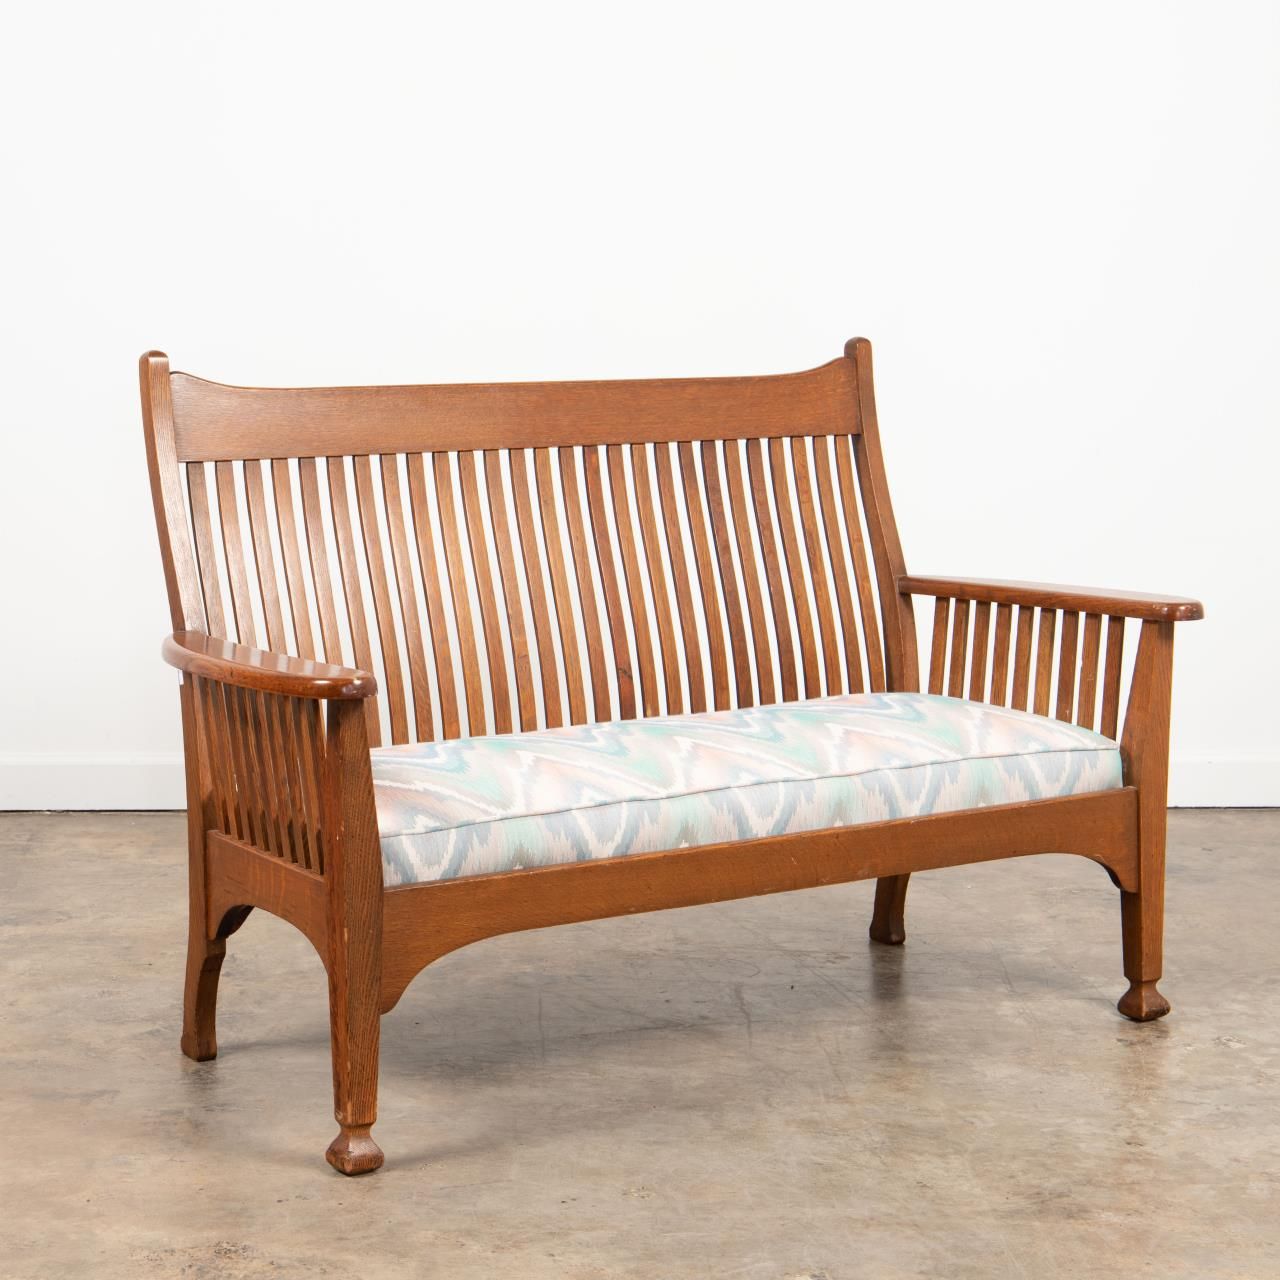 AMERICAN ARTS AND CRAFTS OAK SETTEE 35dccc